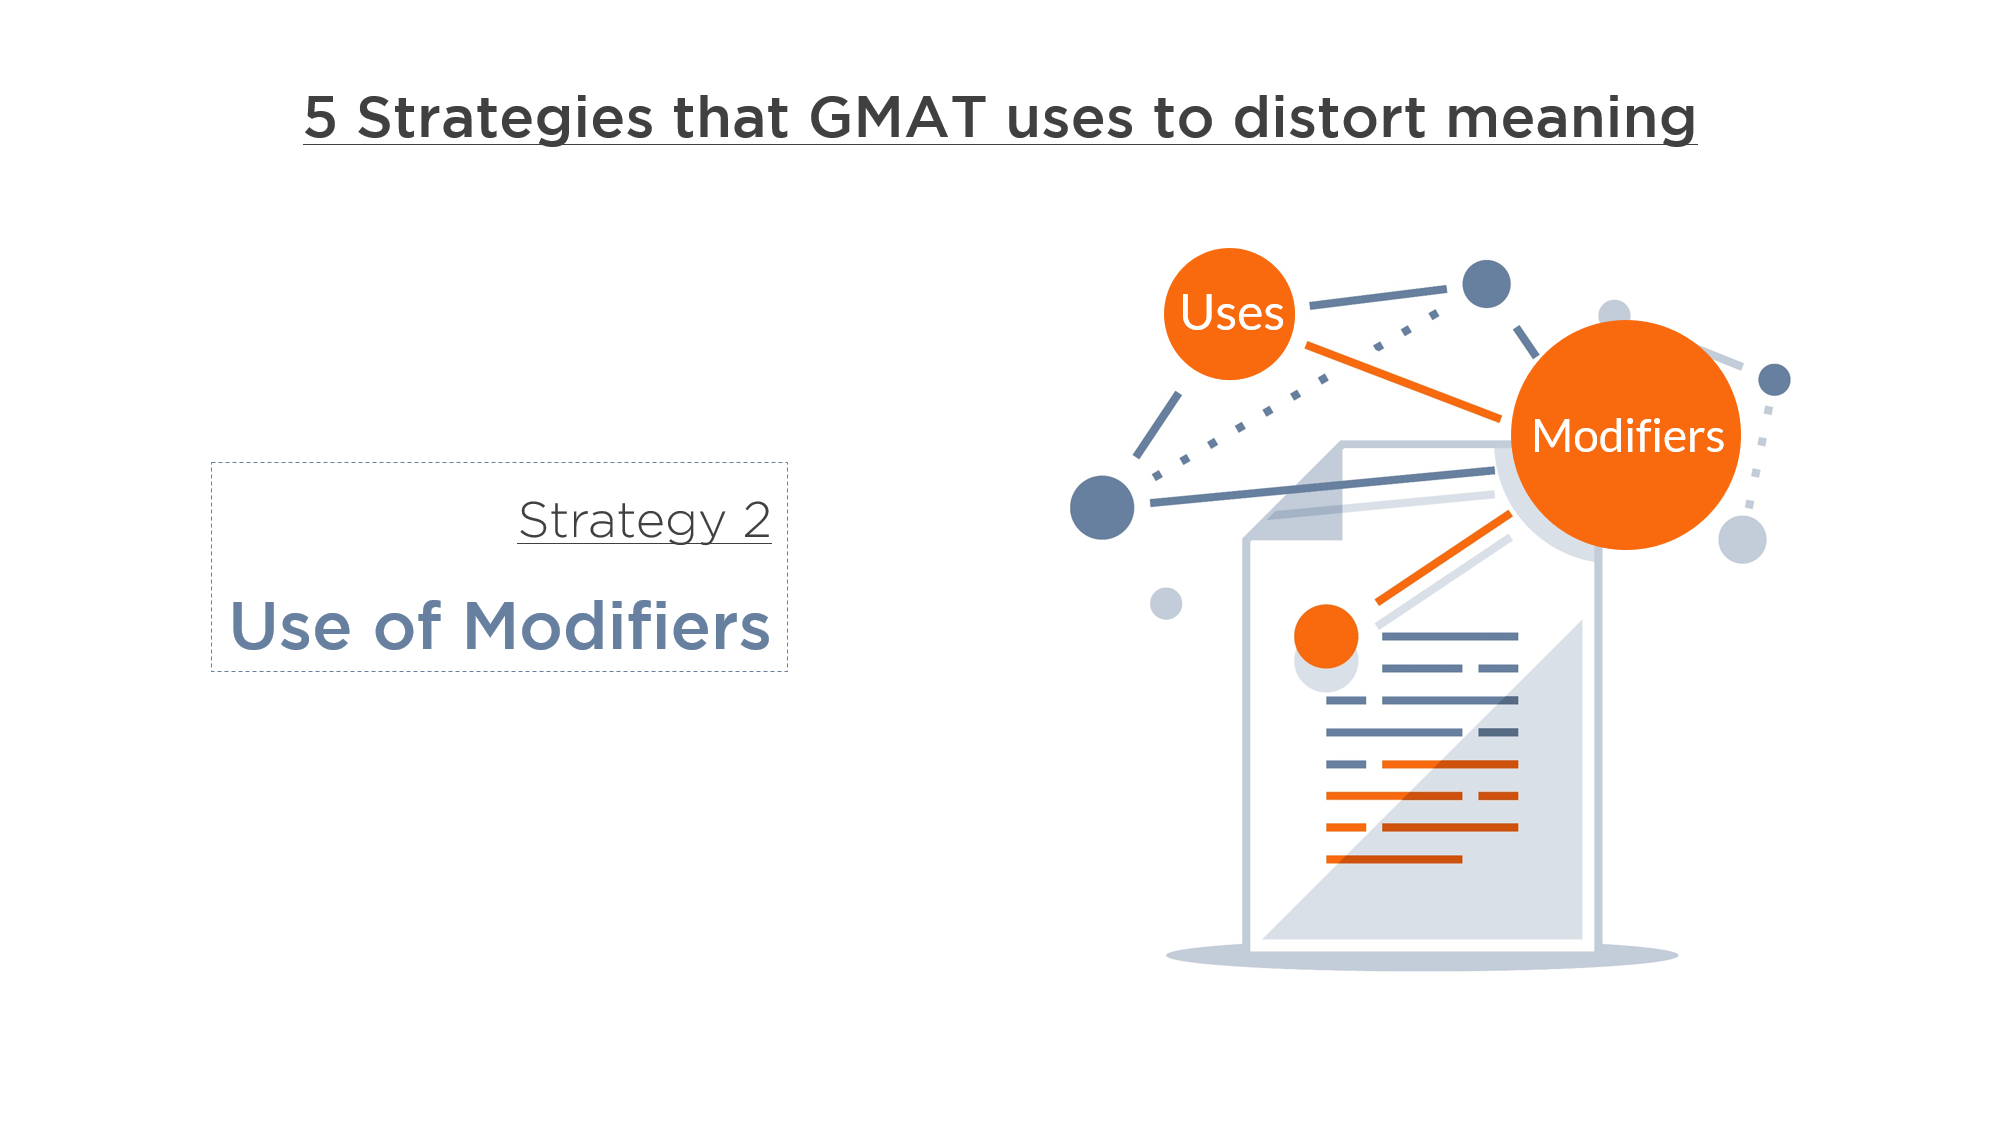 GMAT and Meaning – Part 2: Strategy 2 – Use of Modifiers